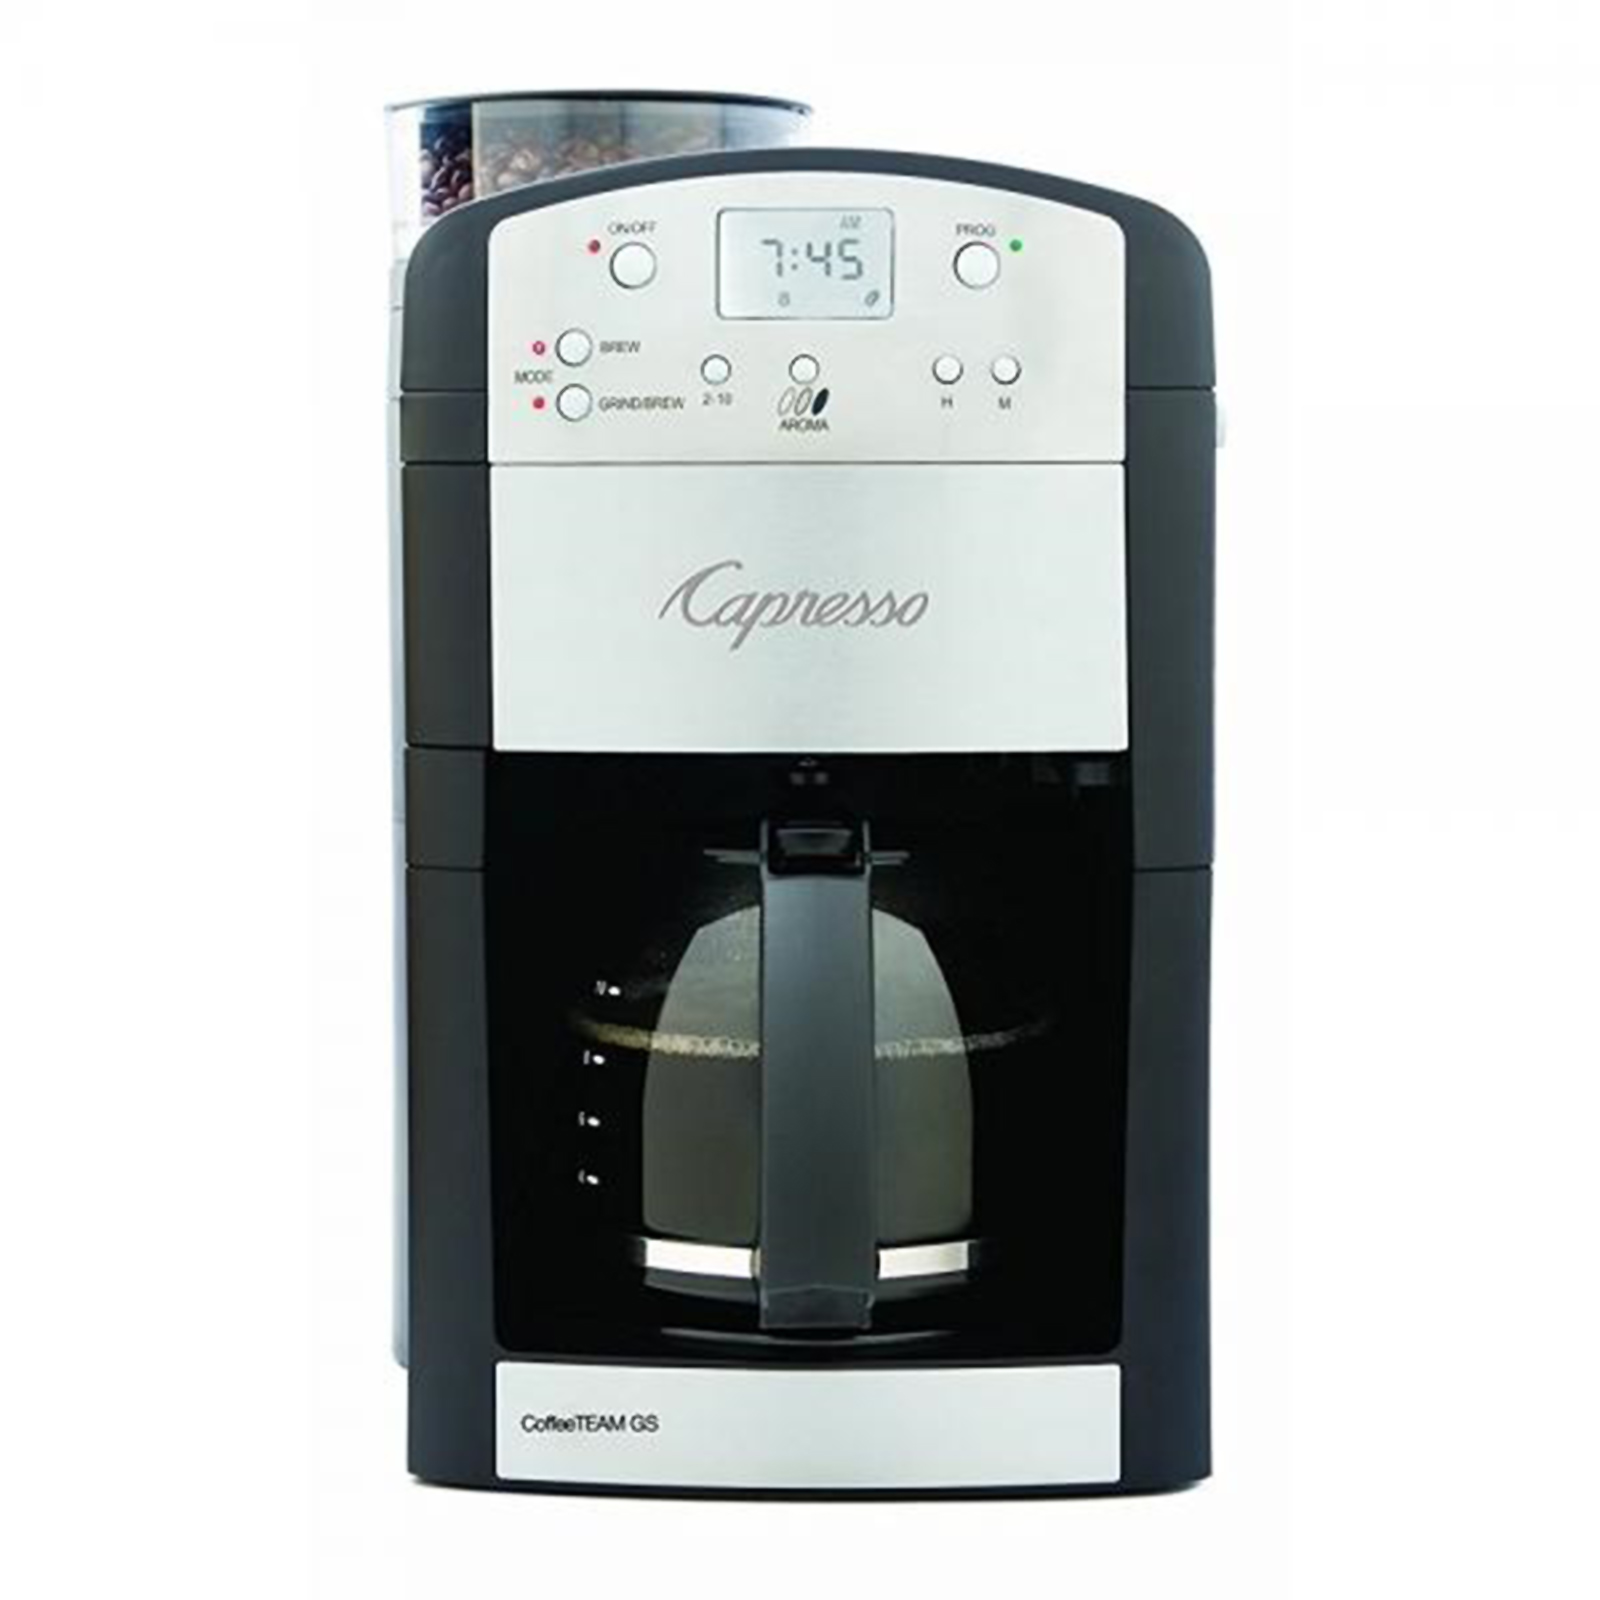 Capresso 464.05 10 Cup CoffeeTEAM GS  Coffeemaker with Carafe and Burr Grinder - Black